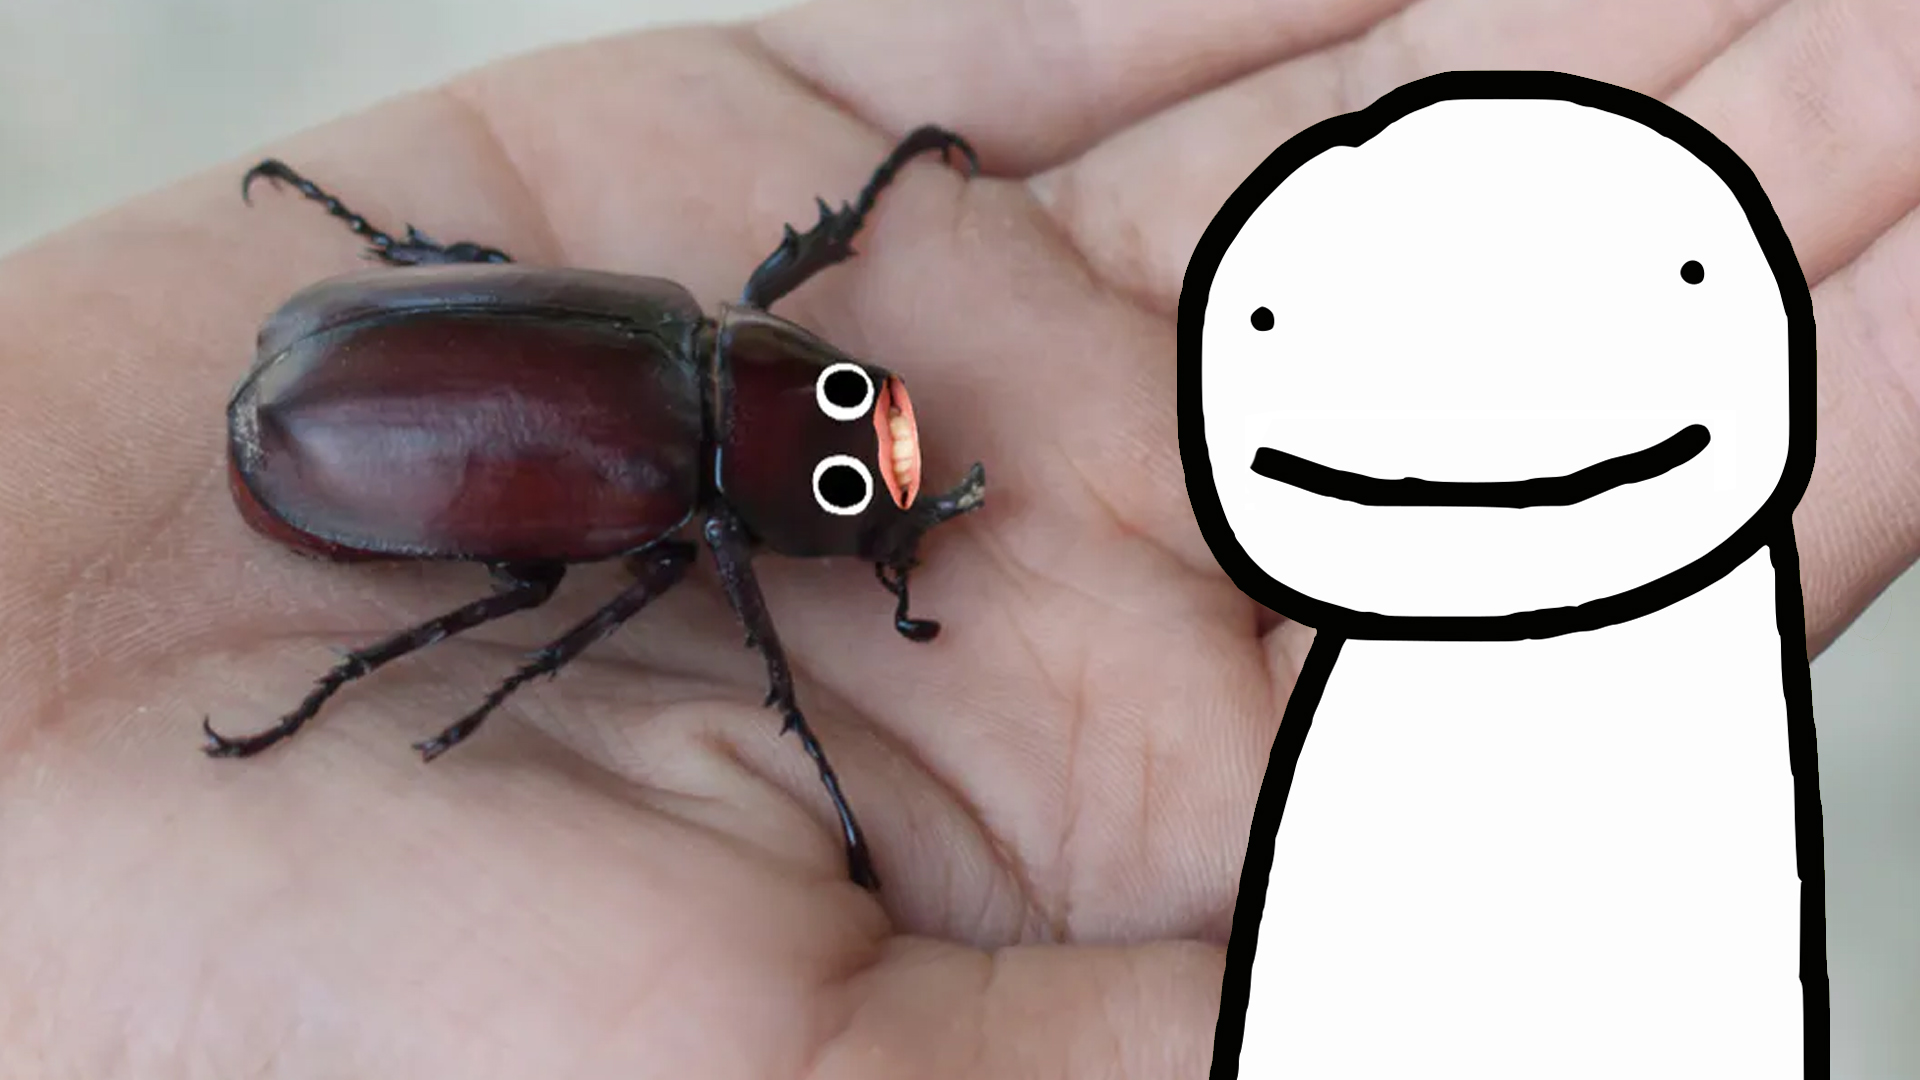 A big beetle in someone's hand